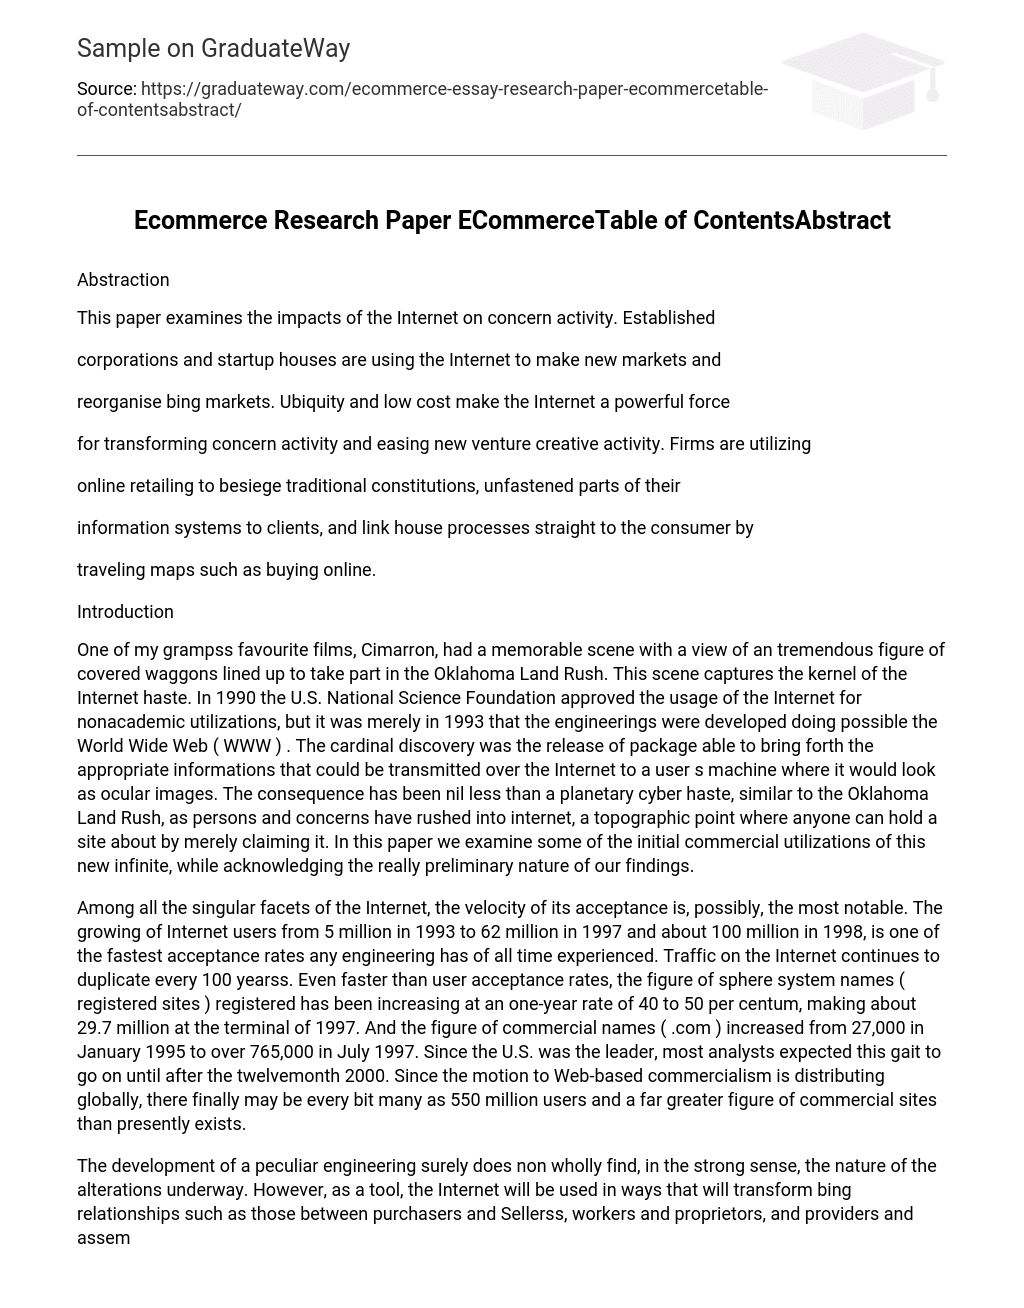 Ecommerce Research Paper ECommerceTable of ContentsAbstract